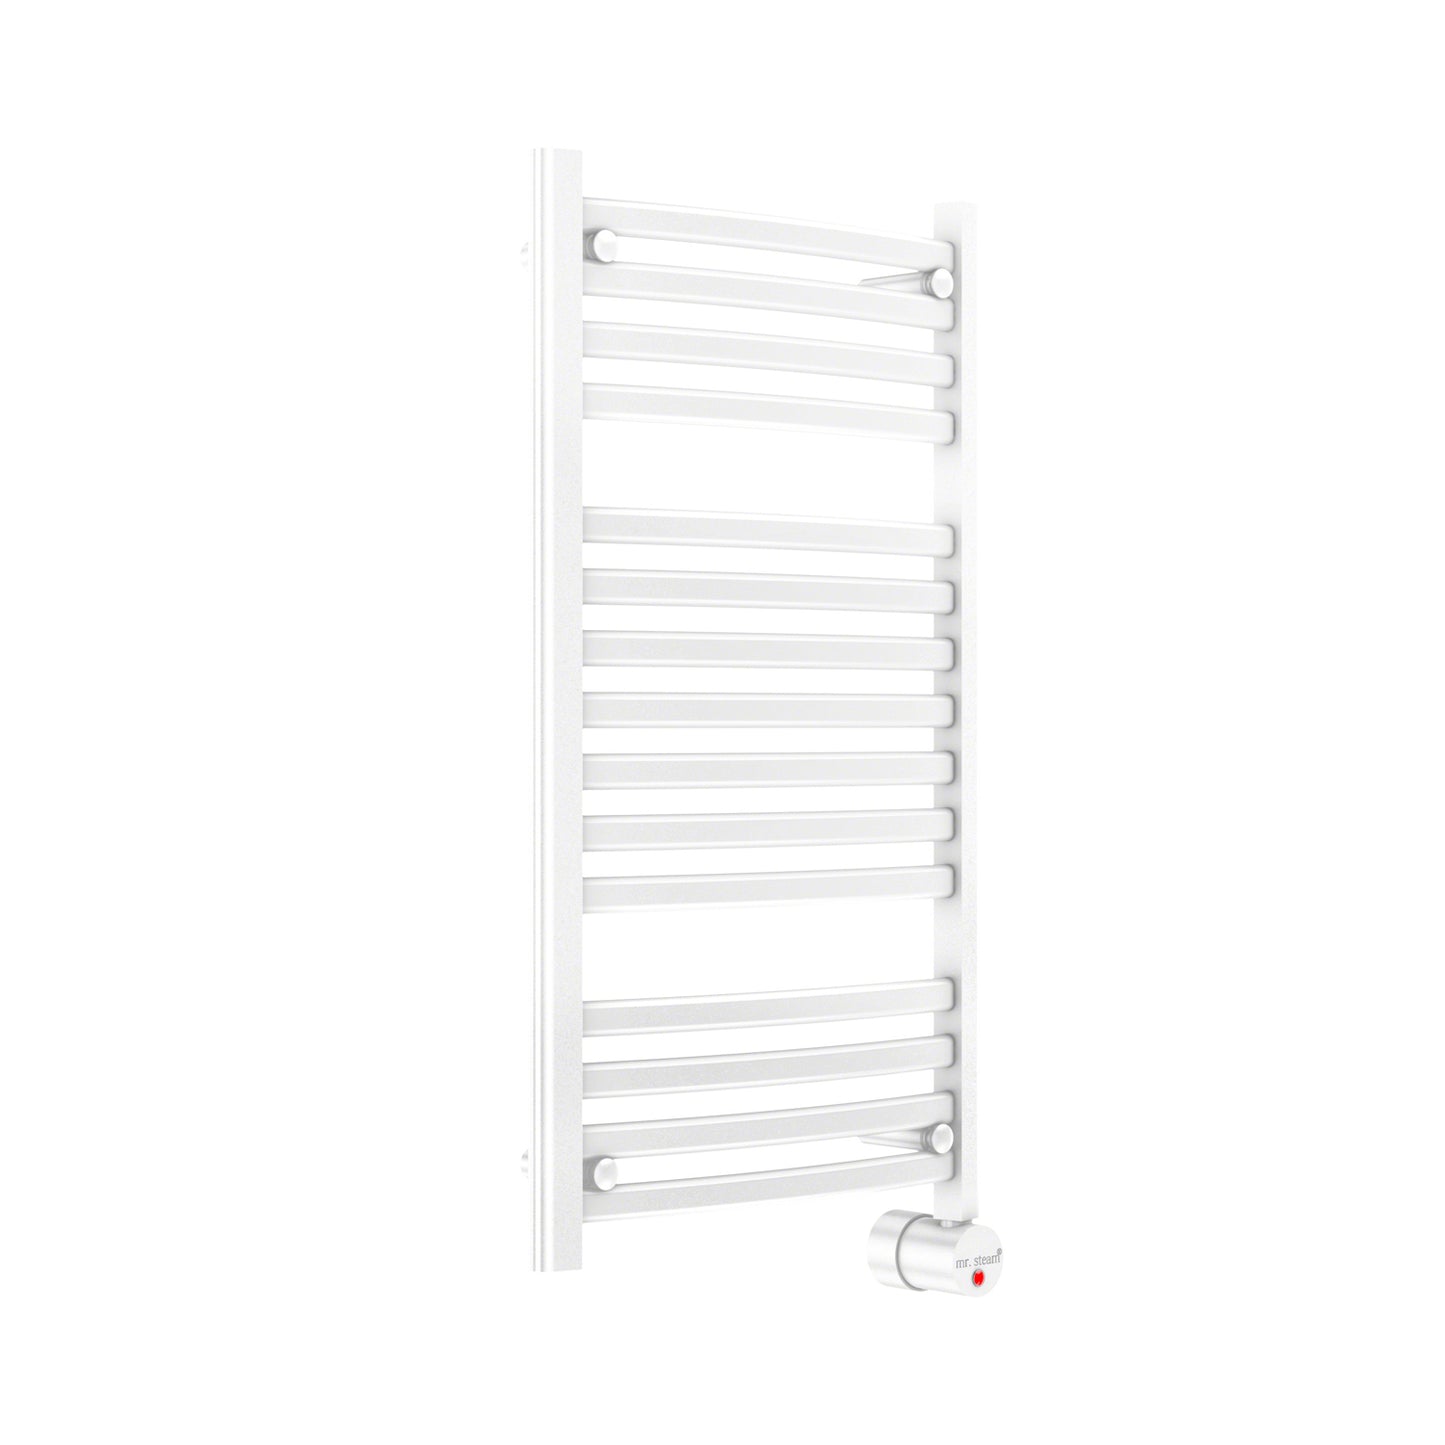 W236 13-Bar Wall Mounted Electric Towel Warmer with Digital Timer in White